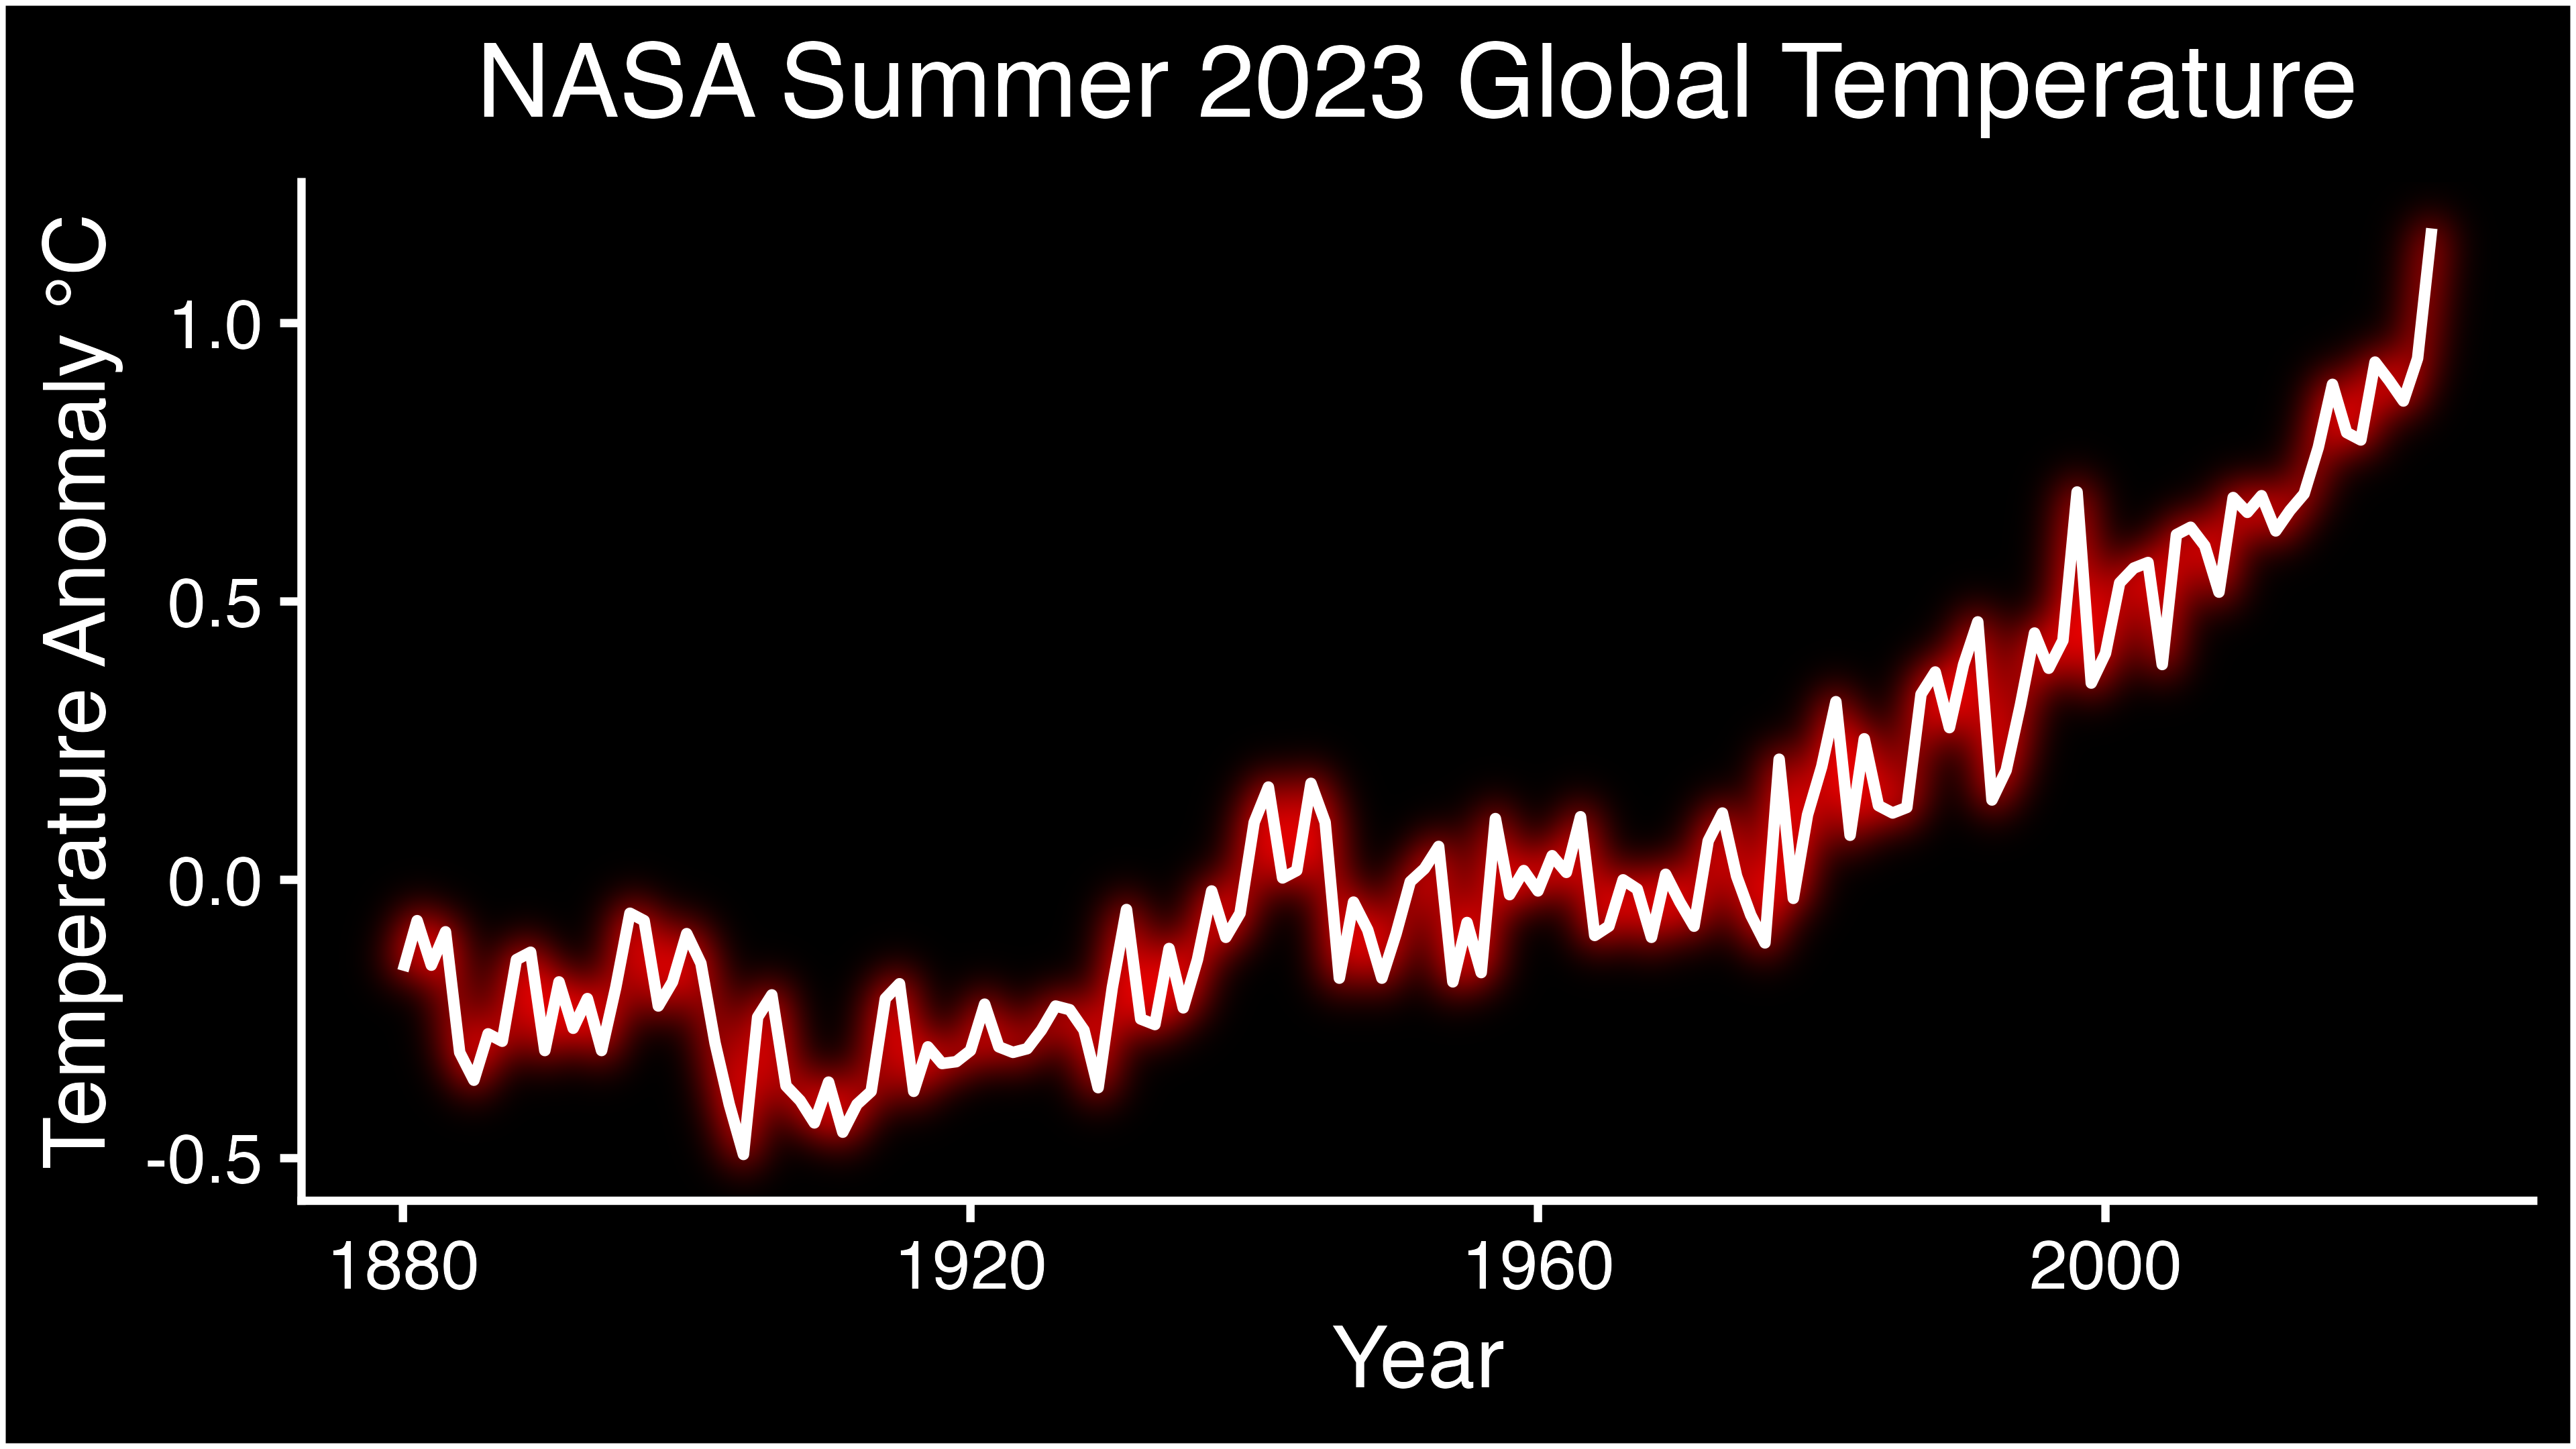 A line graph of summer 2023 temperature anomalies, with a jagged bright red line from left to right across the page. The Y axis is labeled Temperature Anomaly in degrees Celsius, running from -.5 to 1. The X axis is labeled Year, running from 1880 to past 2000, with the line reaching 2023